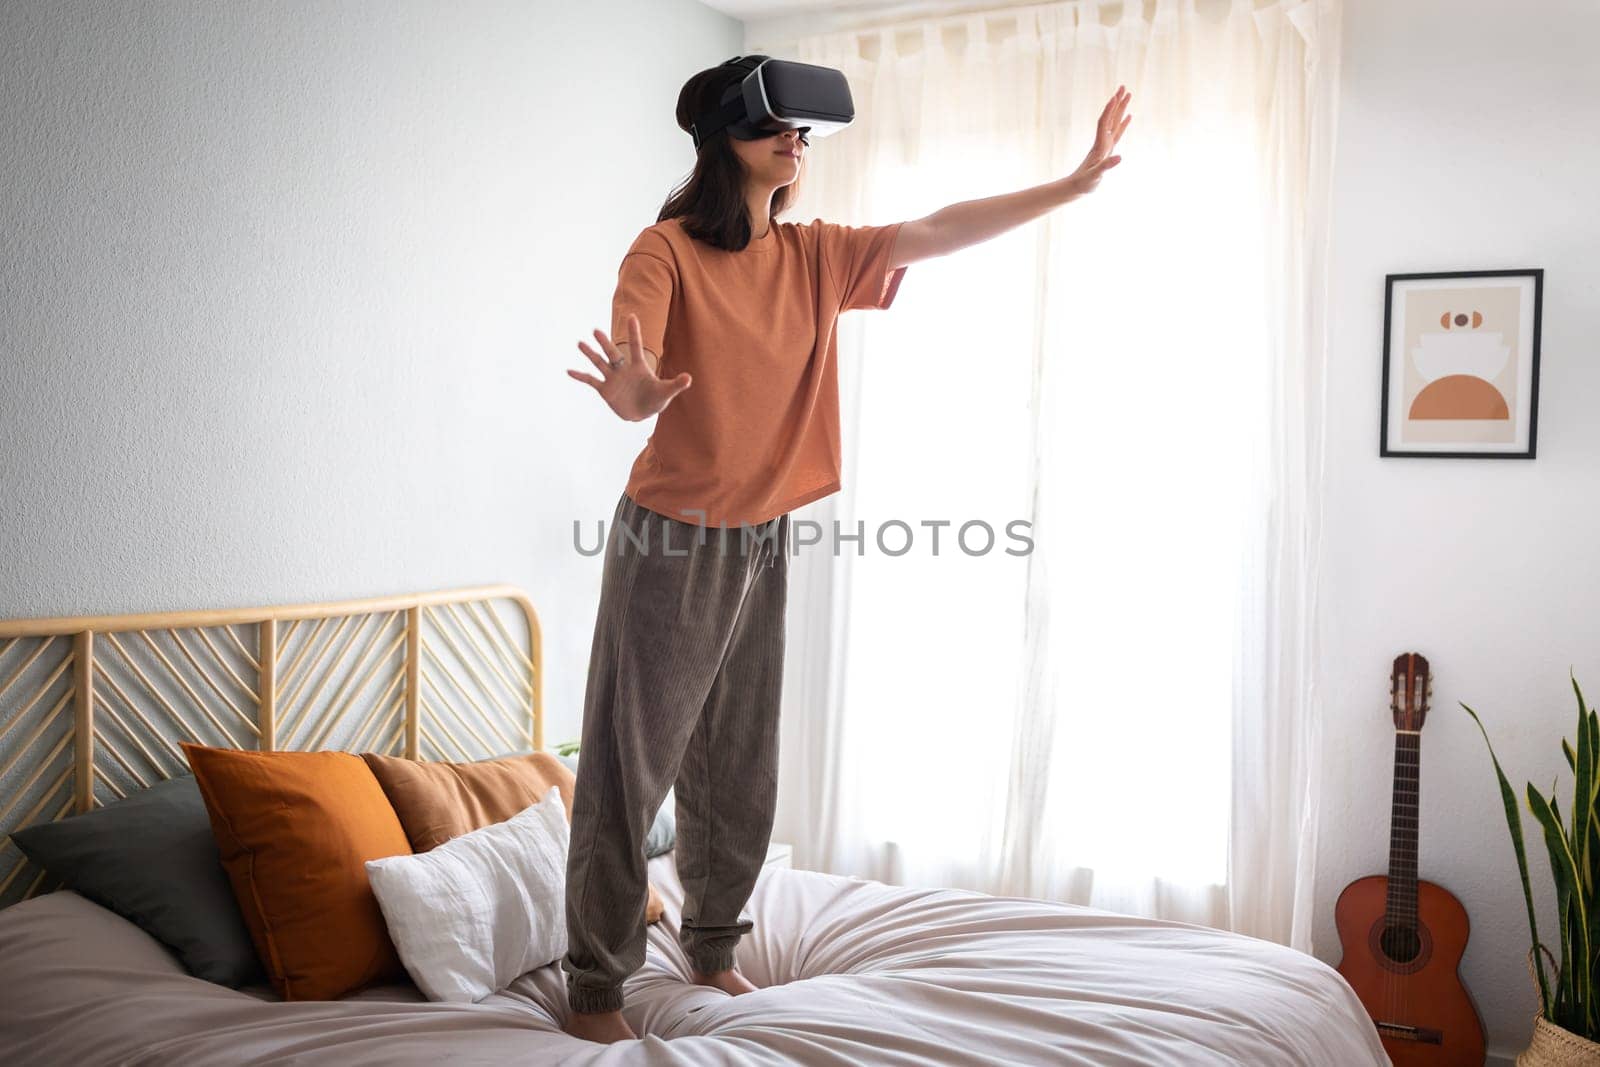 Girl standing on bed, moving hands touching objects in 3D world using VR headset. Using virtual reality goggles. by Hoverstock